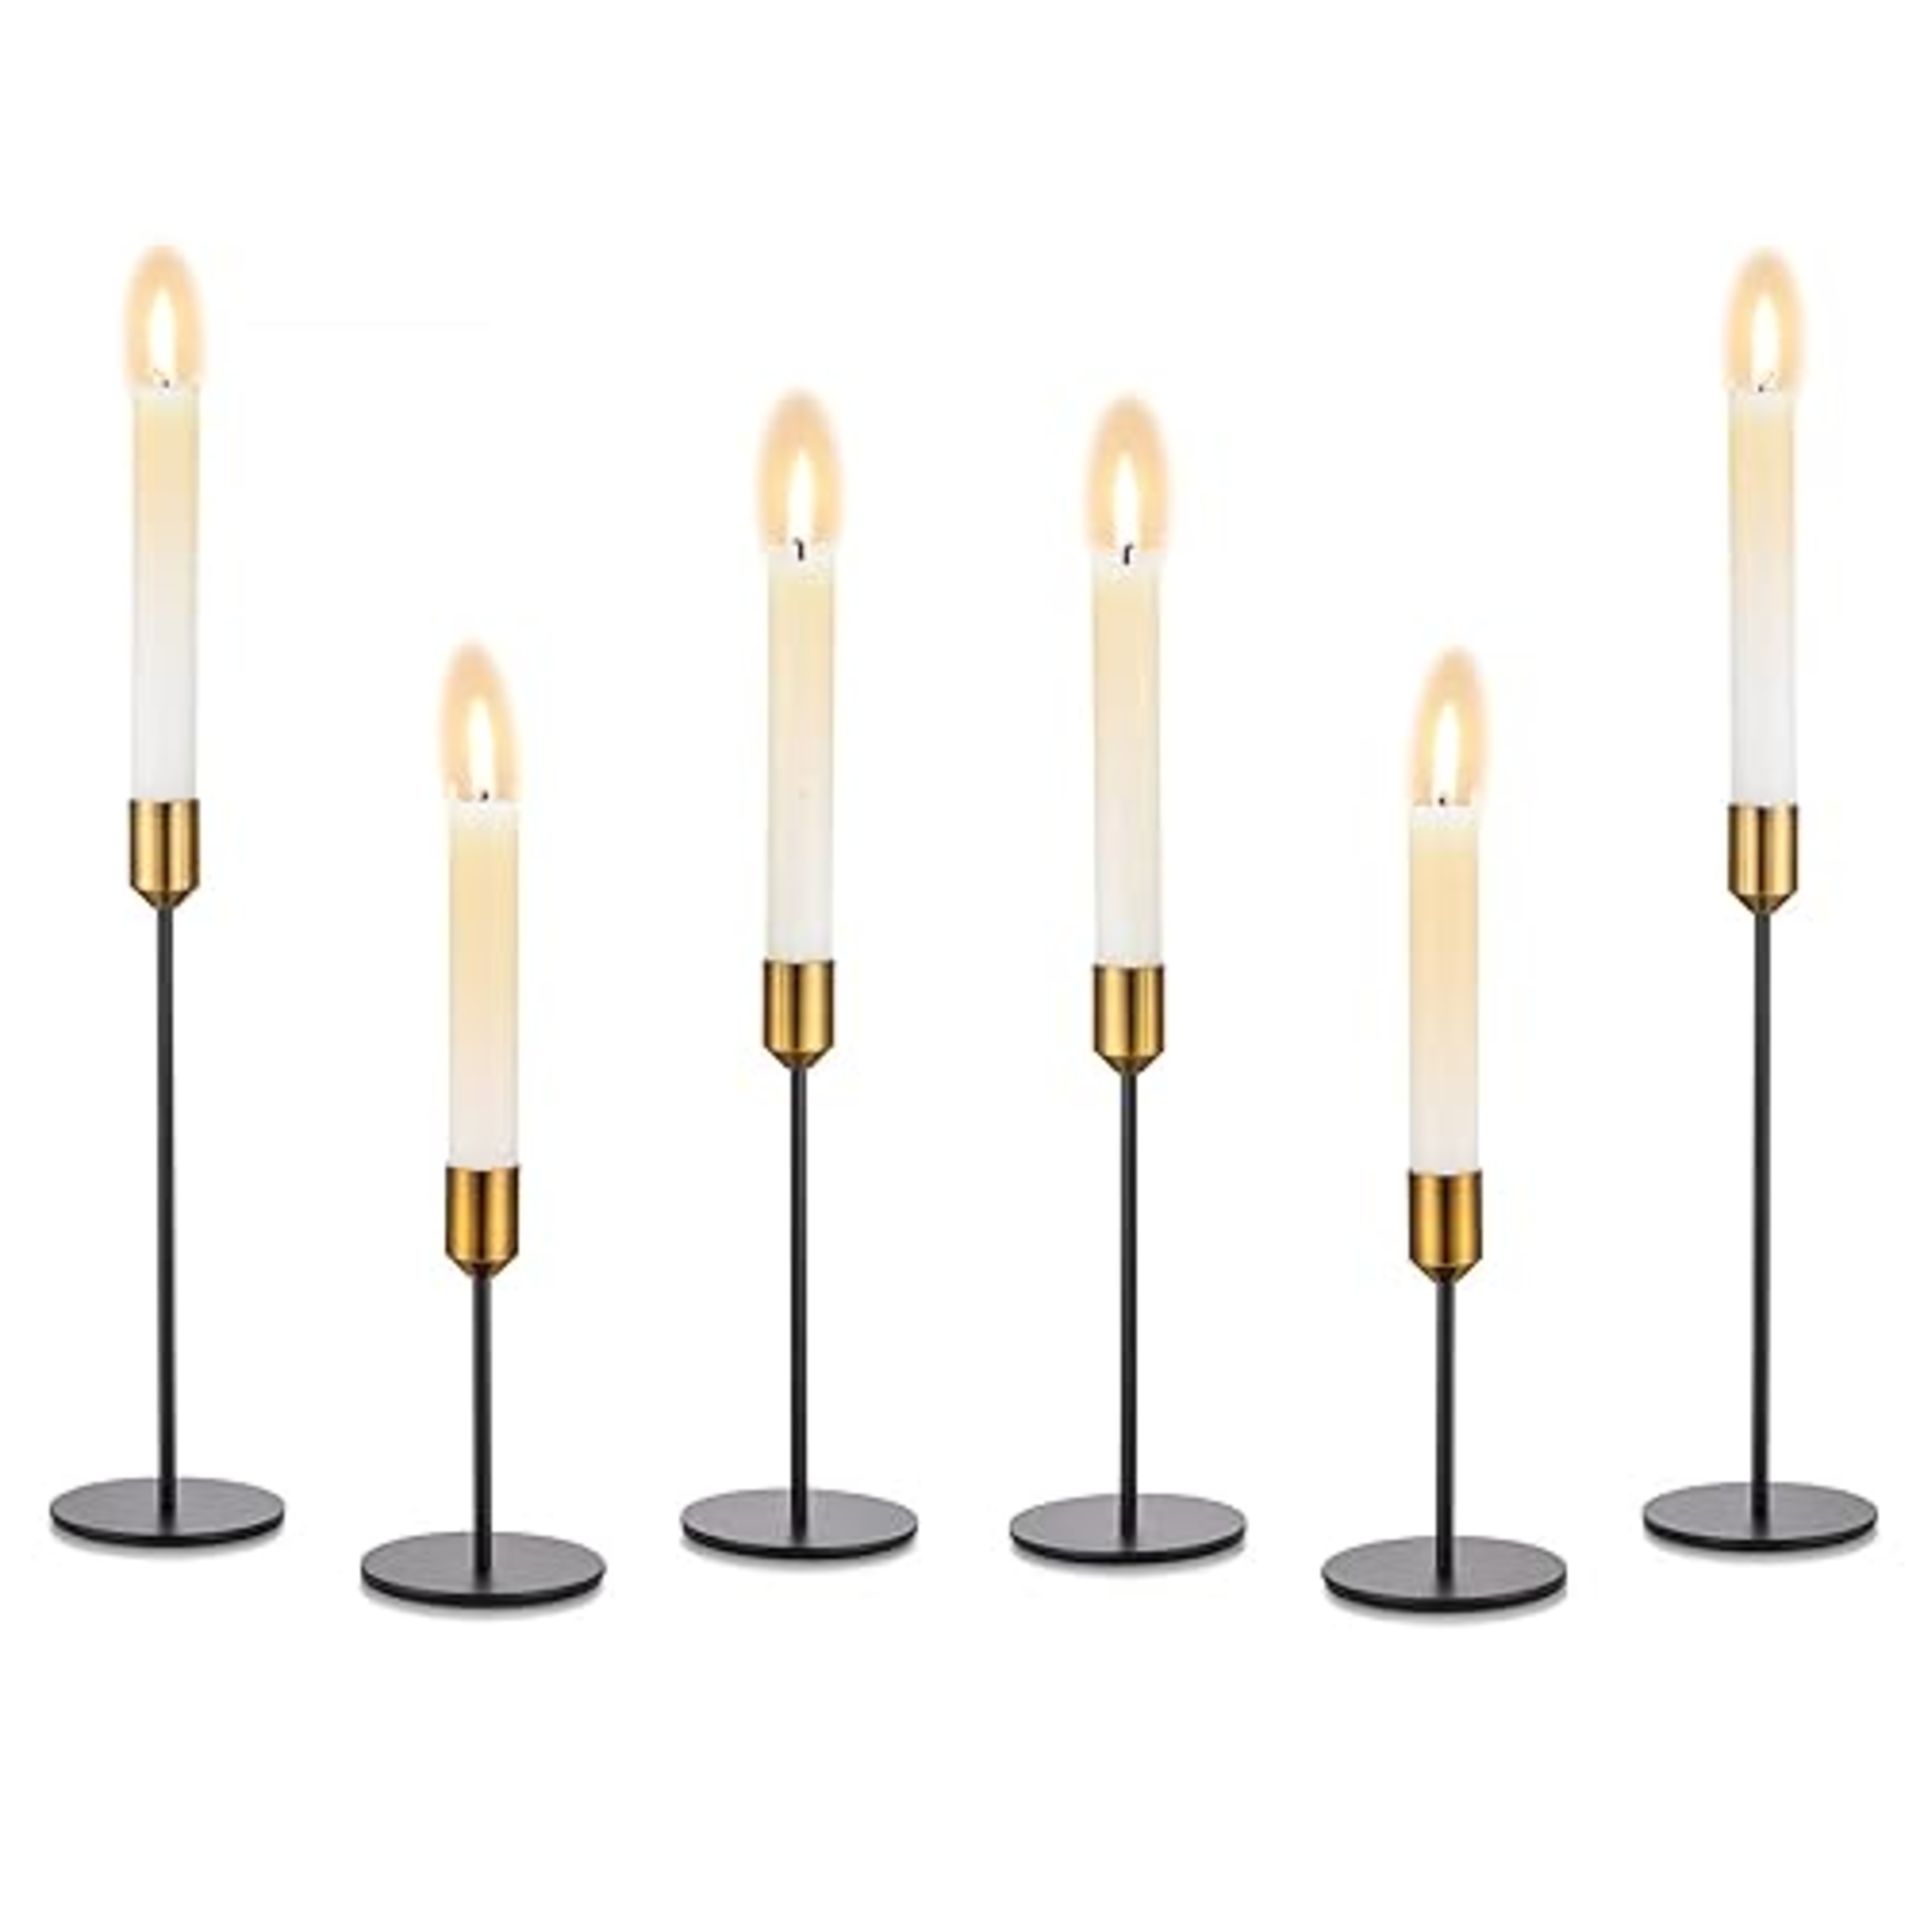 Candle Holders Taper Candle Holder - Set of 6 Black Candlestick Holders With Brass Top Candle Sti...